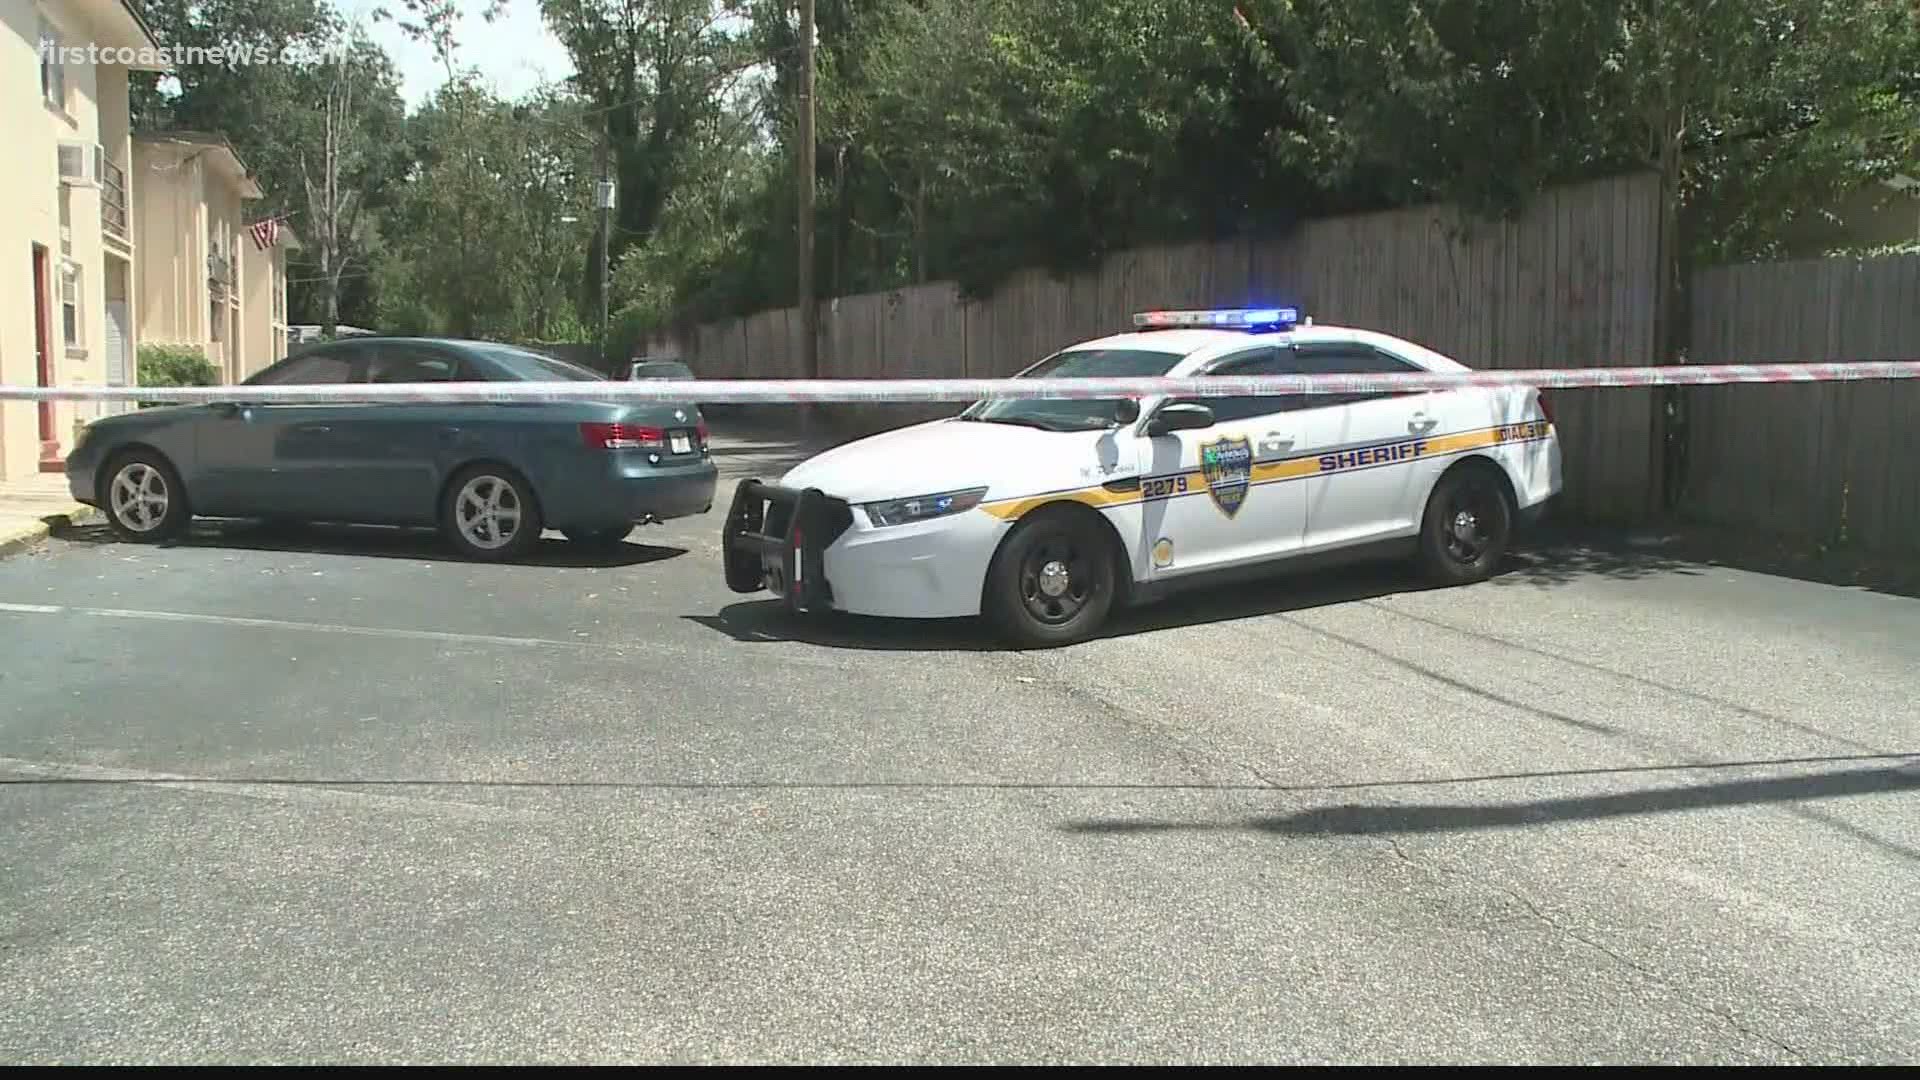 JSO got a call about a shooting in the intersection of Norde Drive West and 103rd Street around 11:45 a.m.